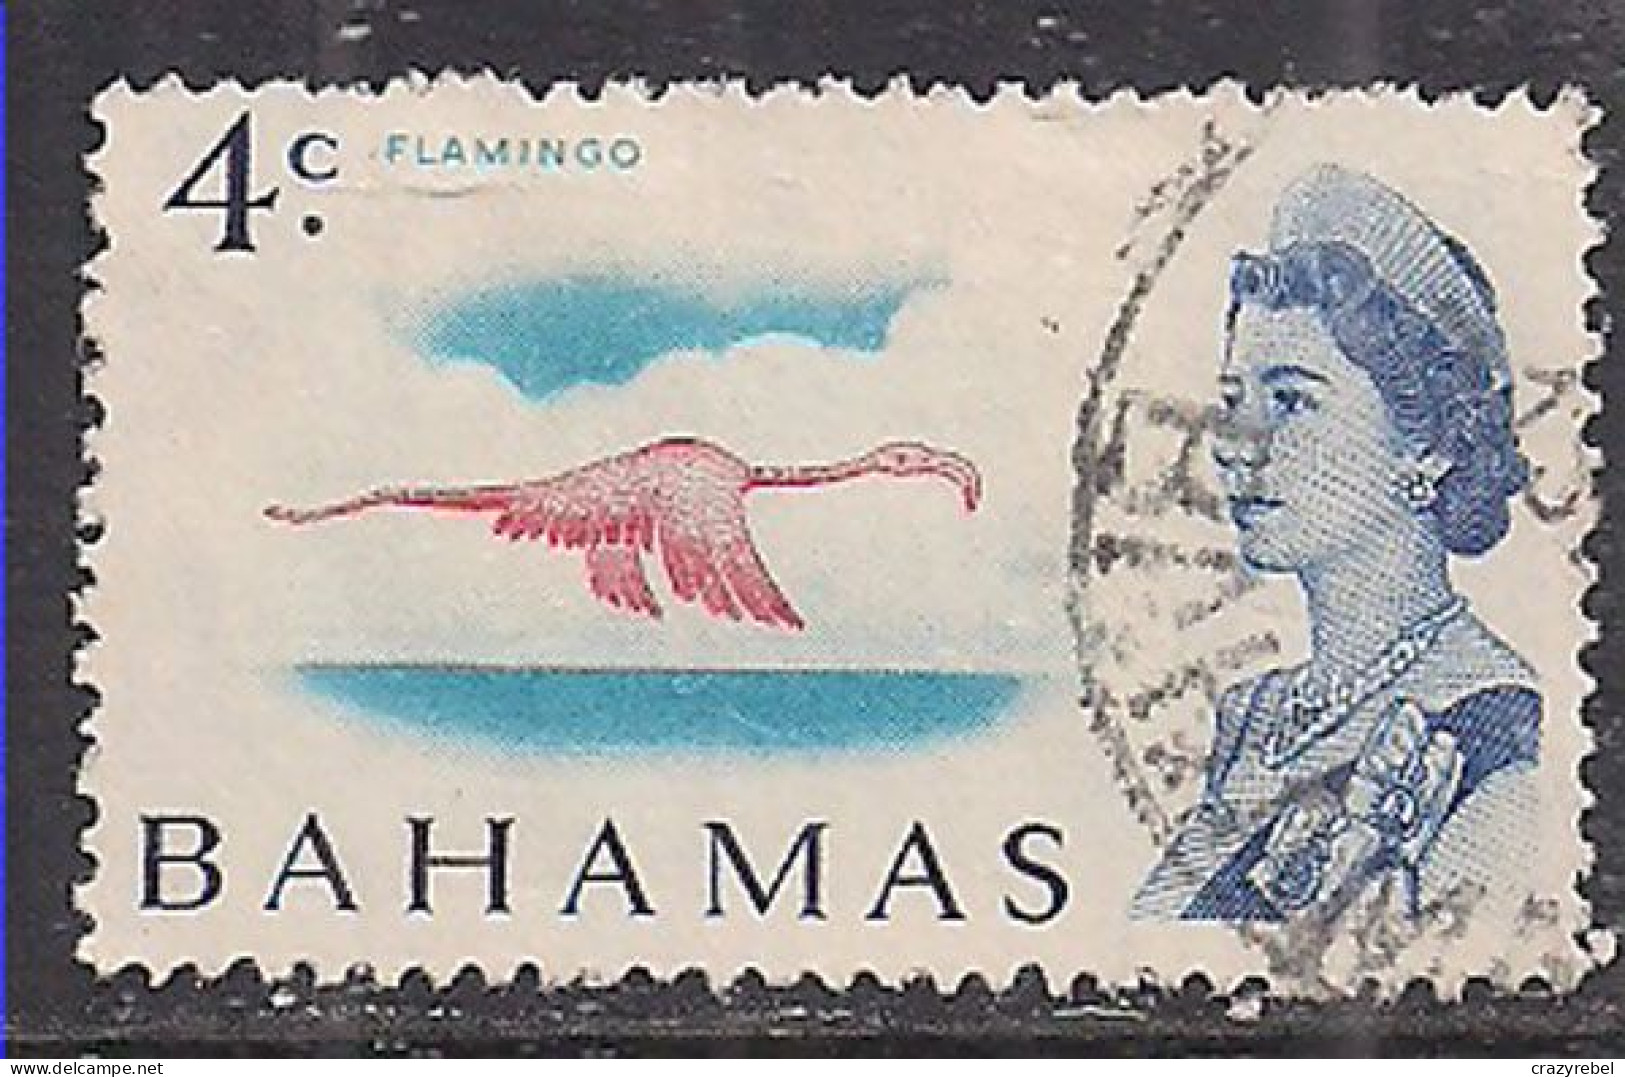 Bahamas 1967/71 QE2 4cents Birds SG 298 Used ( F393 ) - 1963-1973 Ministerial Government